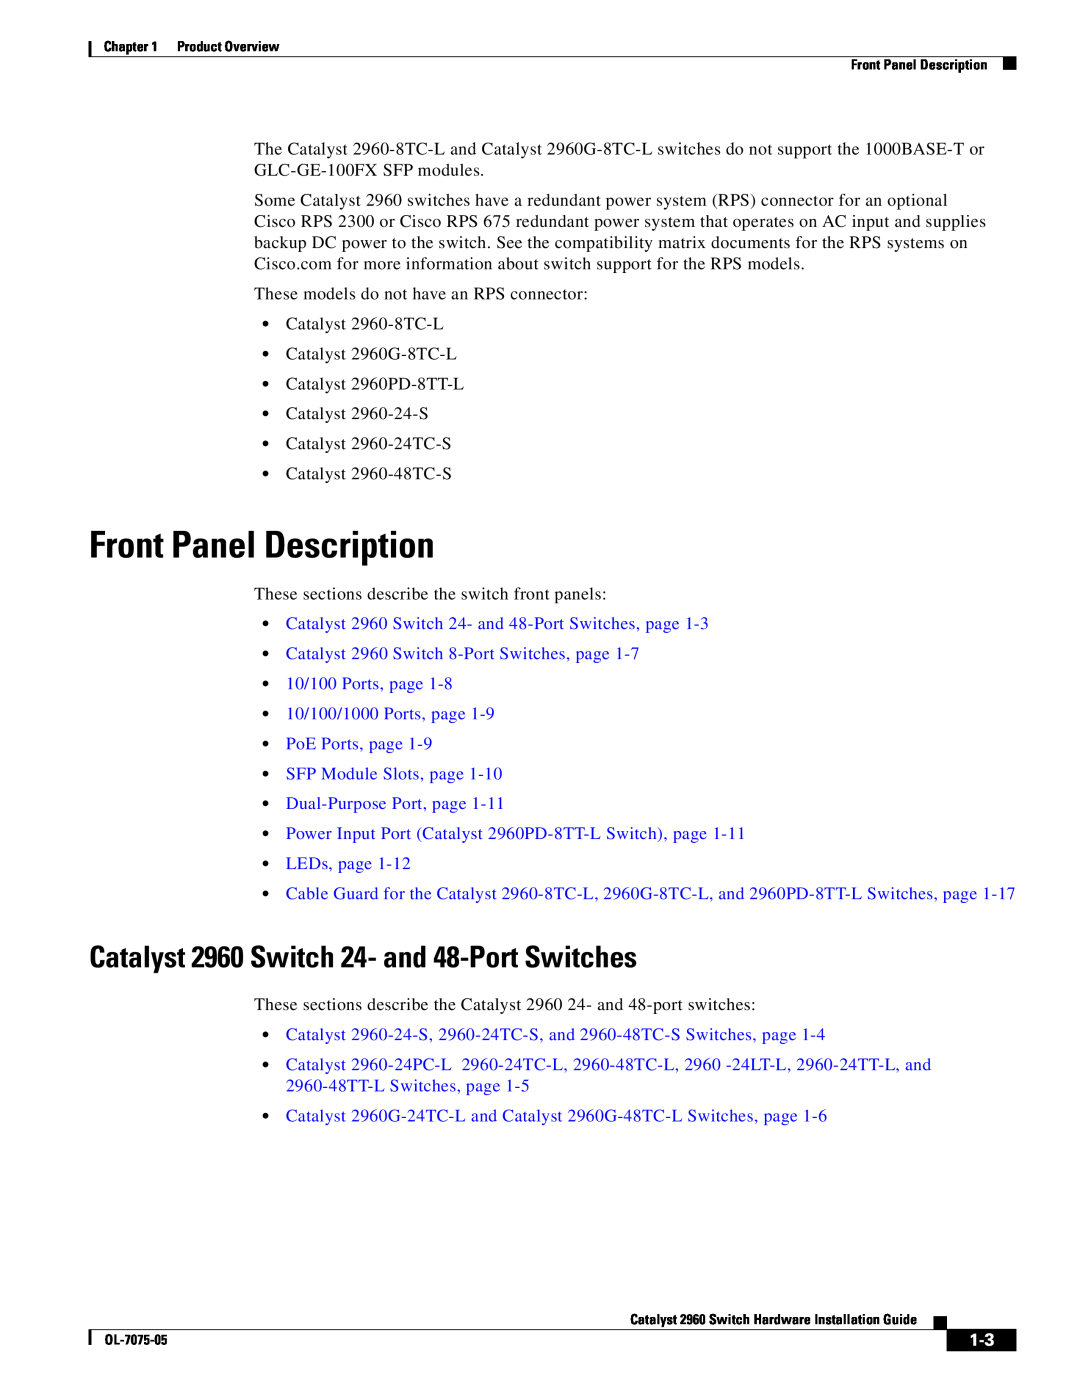 Cisco Systems Front Panel Description, Catalyst 2960 Switch 24- and 48-Port Switches, Dual-Purpose Port, page 